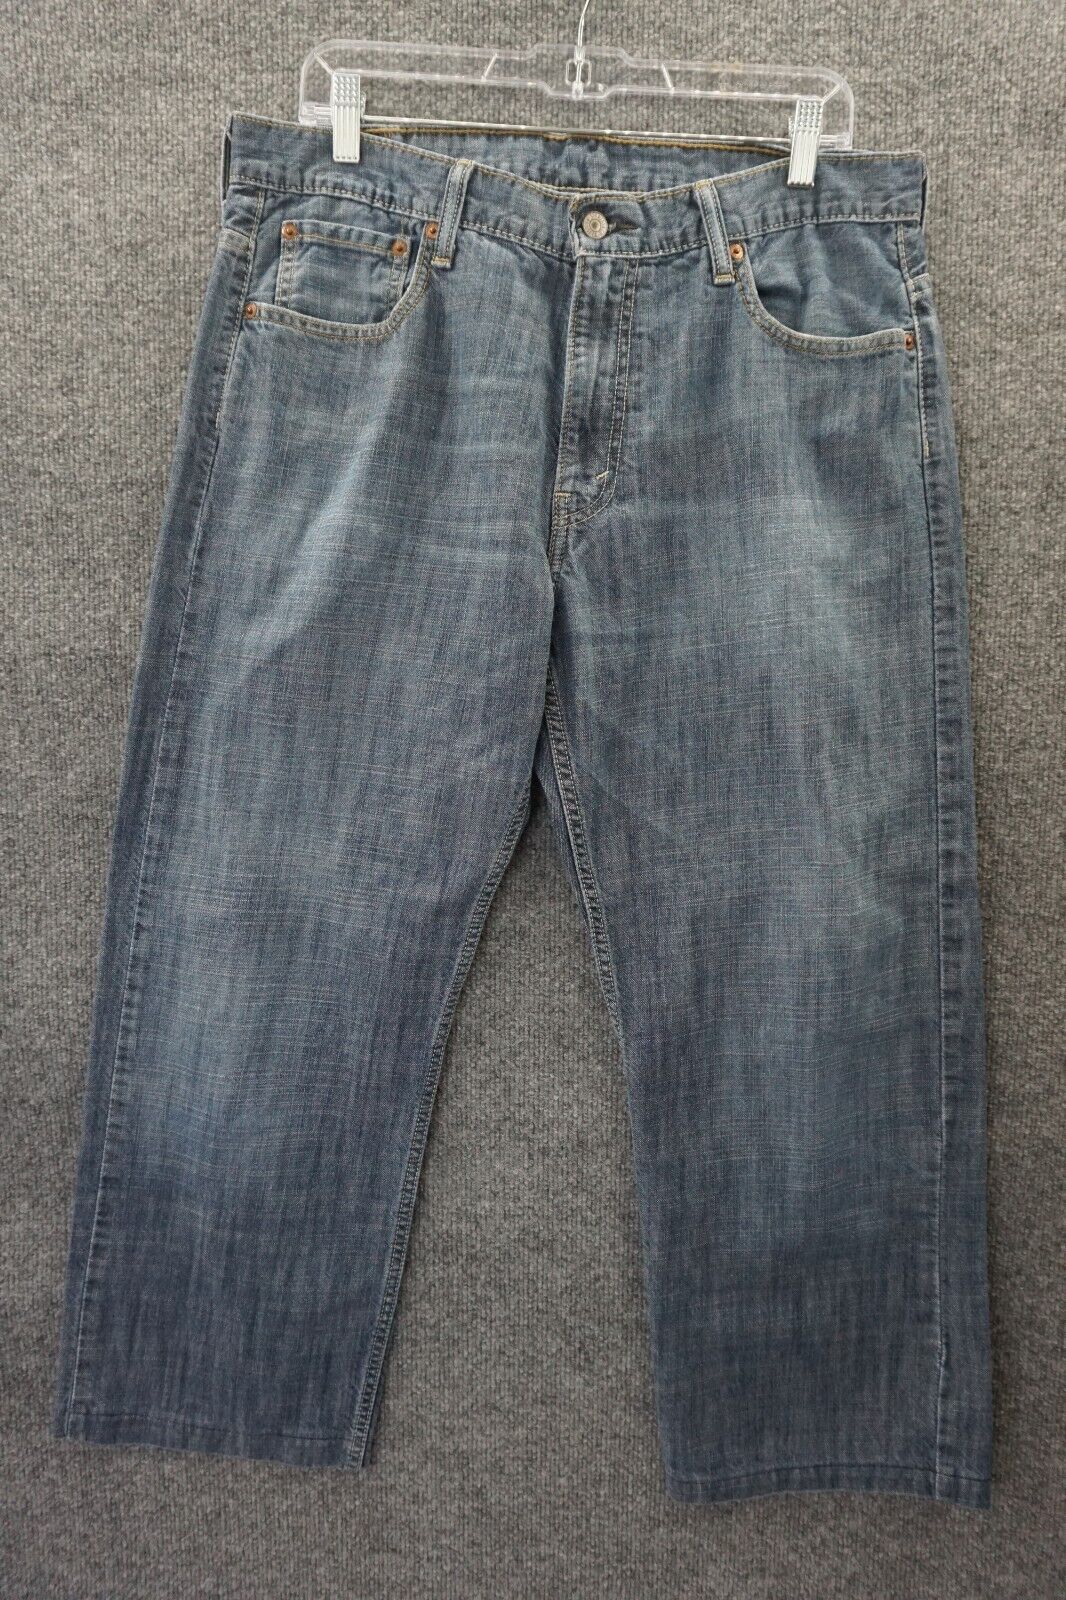 Levis 569 Jeans Mens 34x27 Blue Relaxed Fit Strai… - image 1